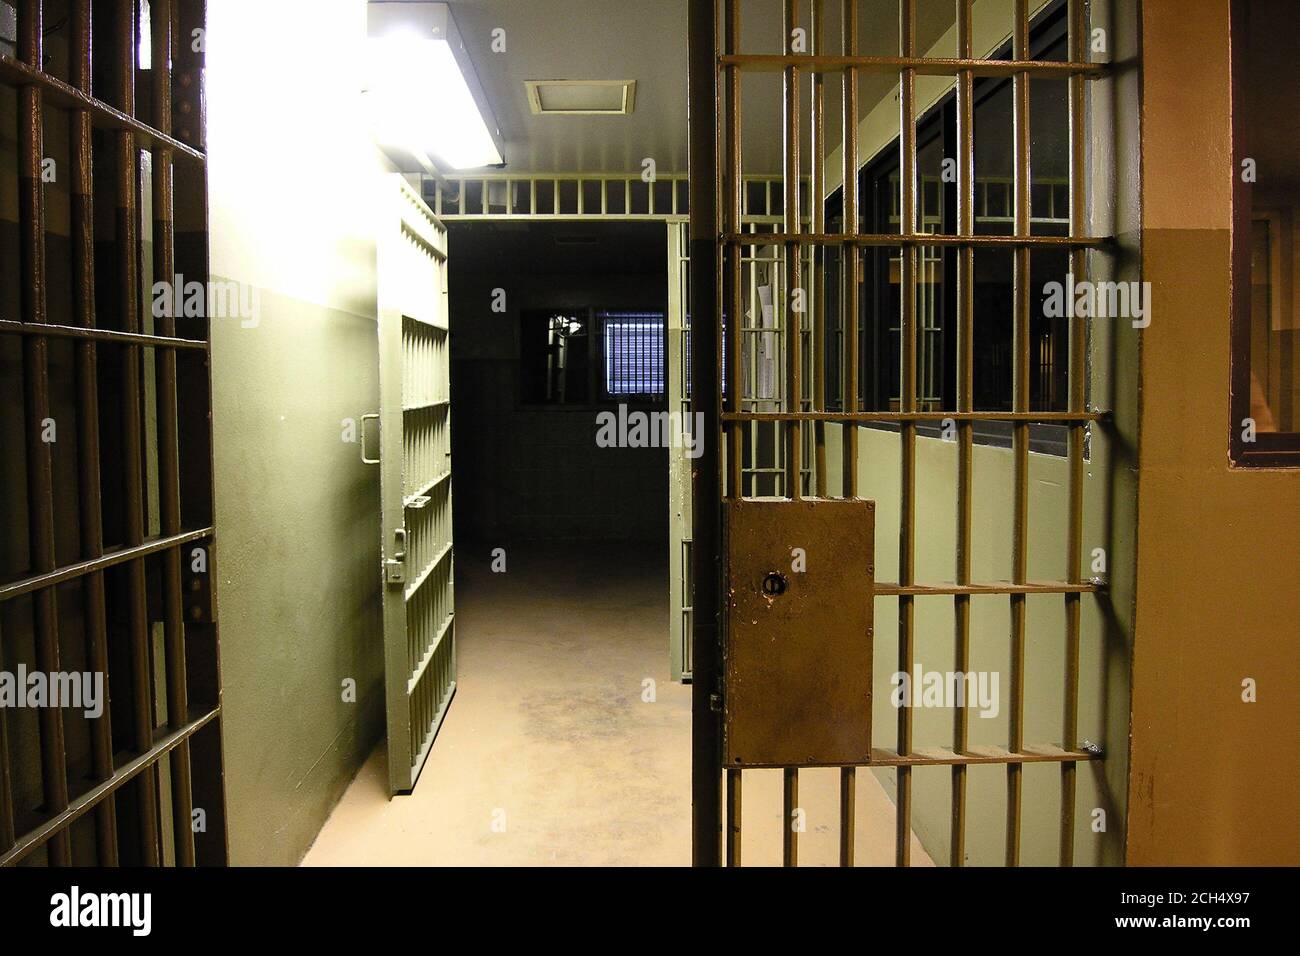 Old empty police station jail cells in the United States. Stock Photo